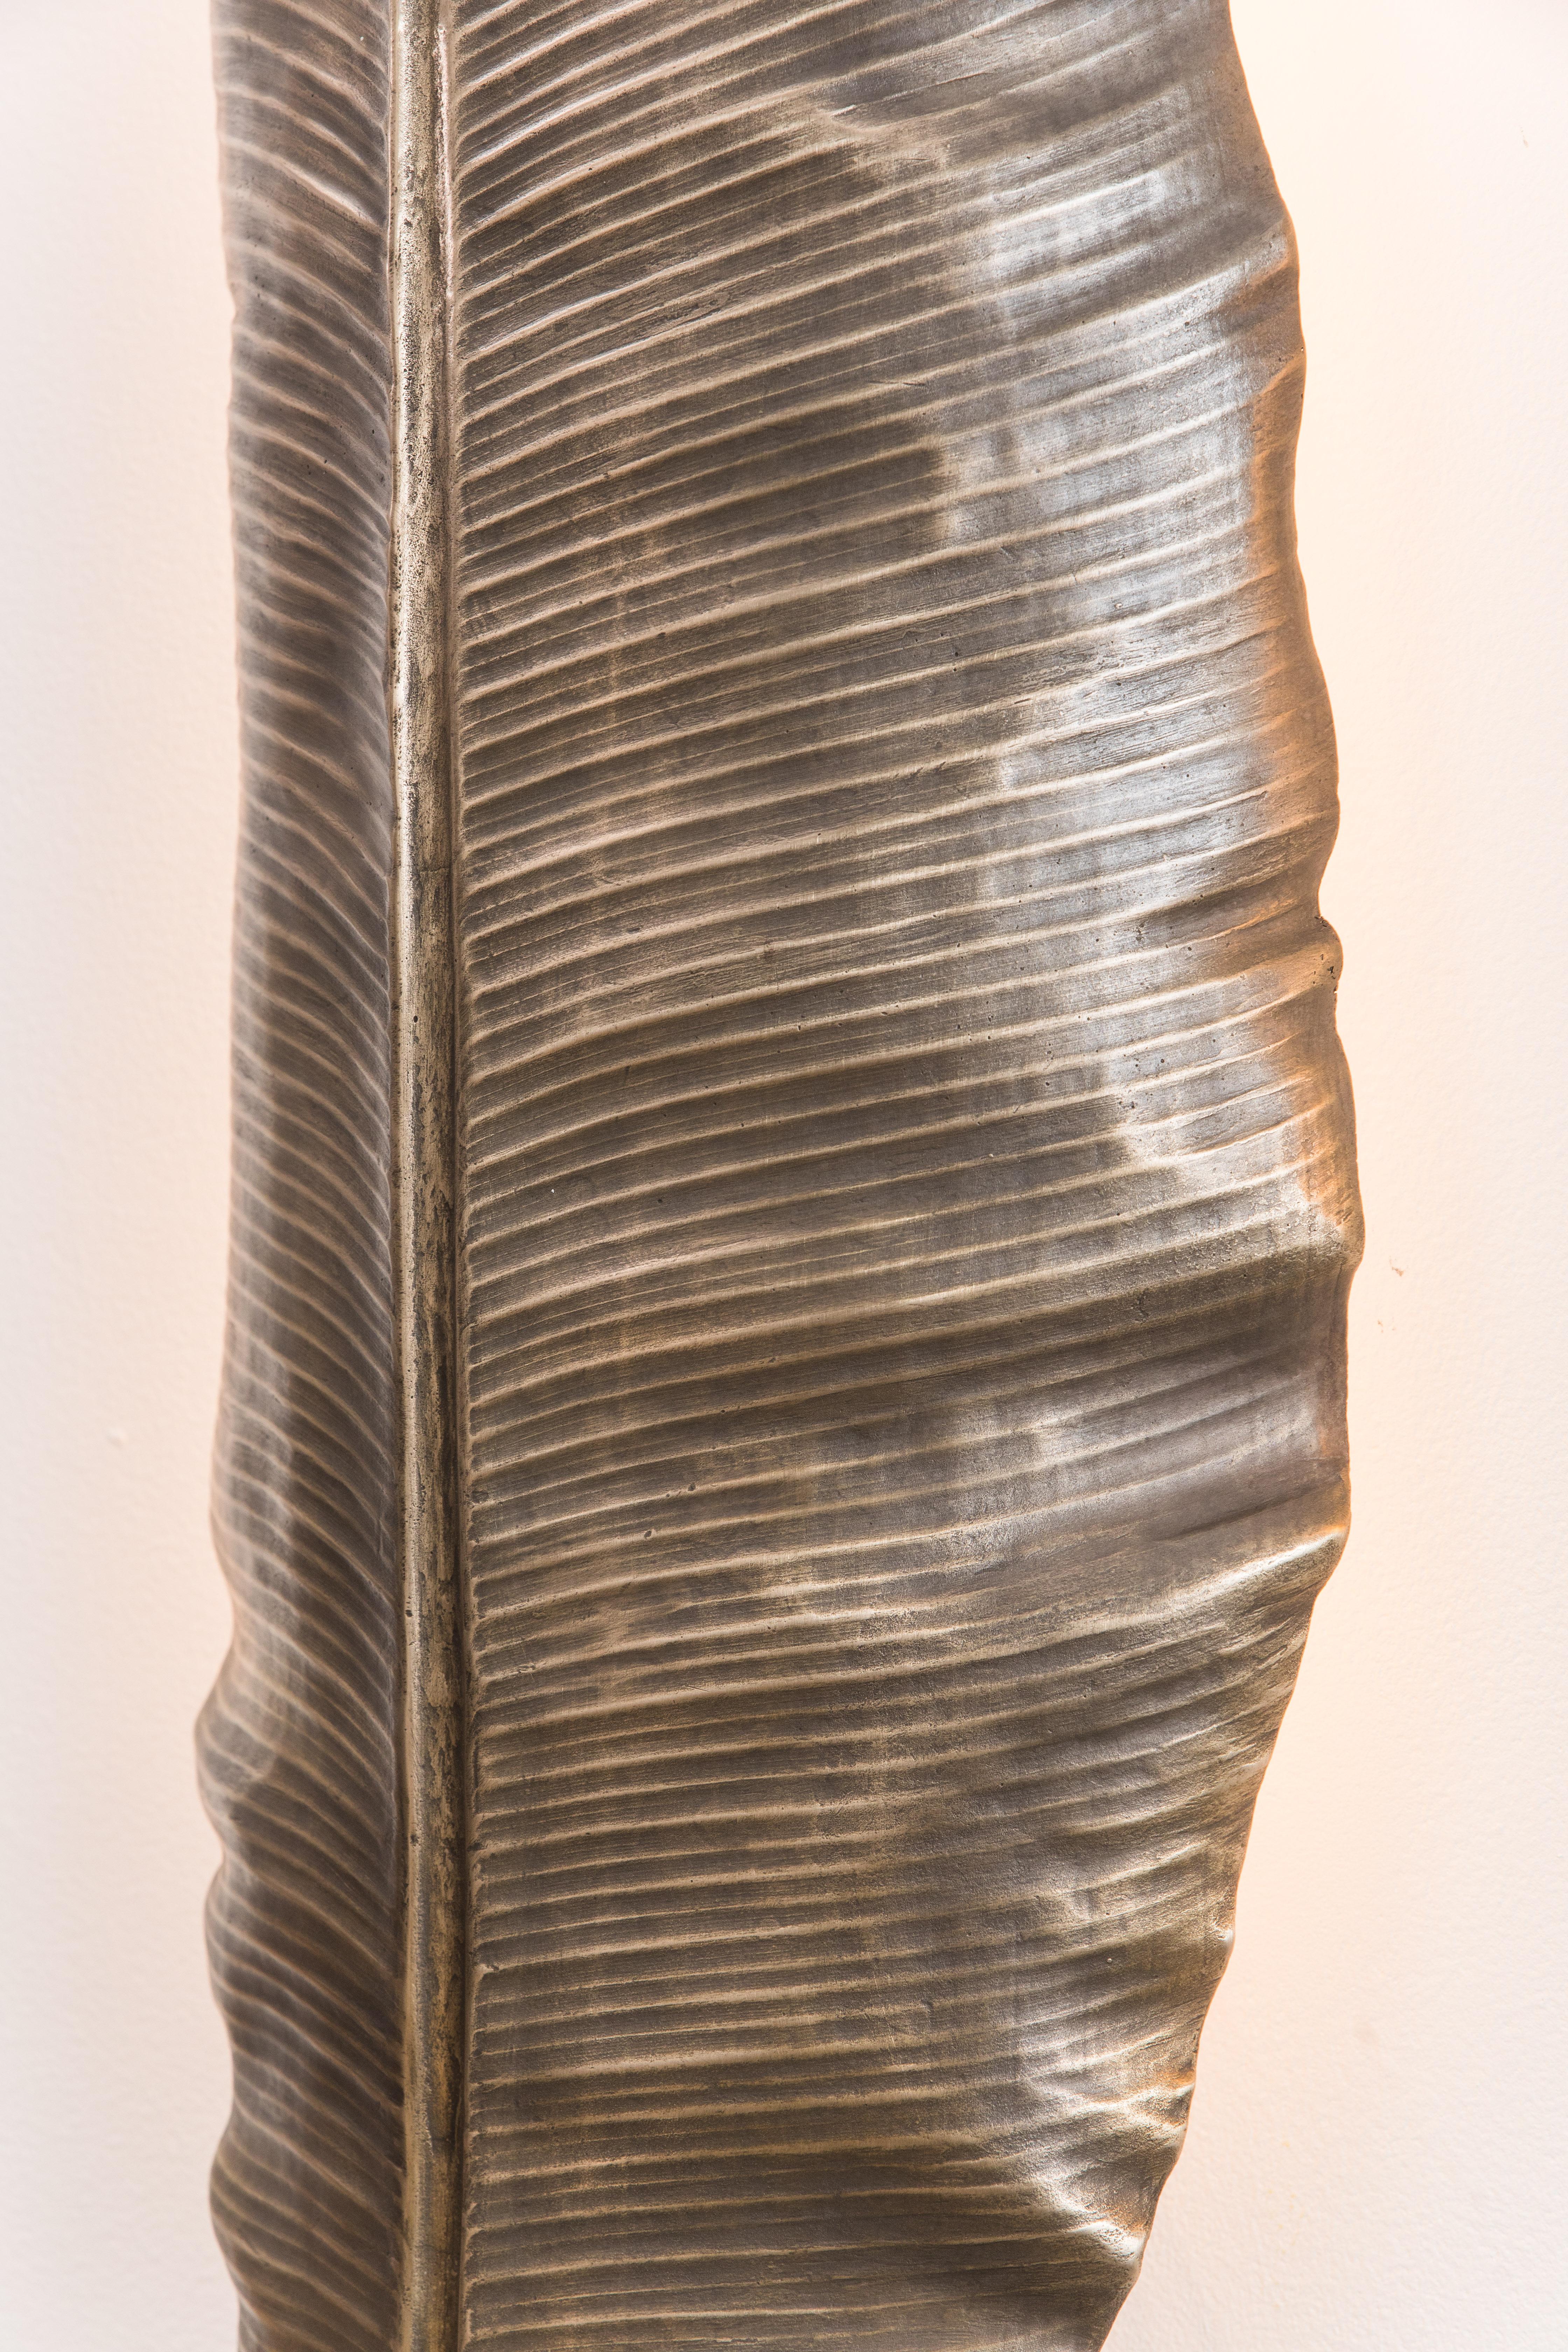 New York-based contemporary sculptor Erin Sullivan employs the labor-intensive lost-wax process to create exquisite, realistic bronze interpretations of her organic subject matter.

The work expresses ideas of time and memory, constant themes in